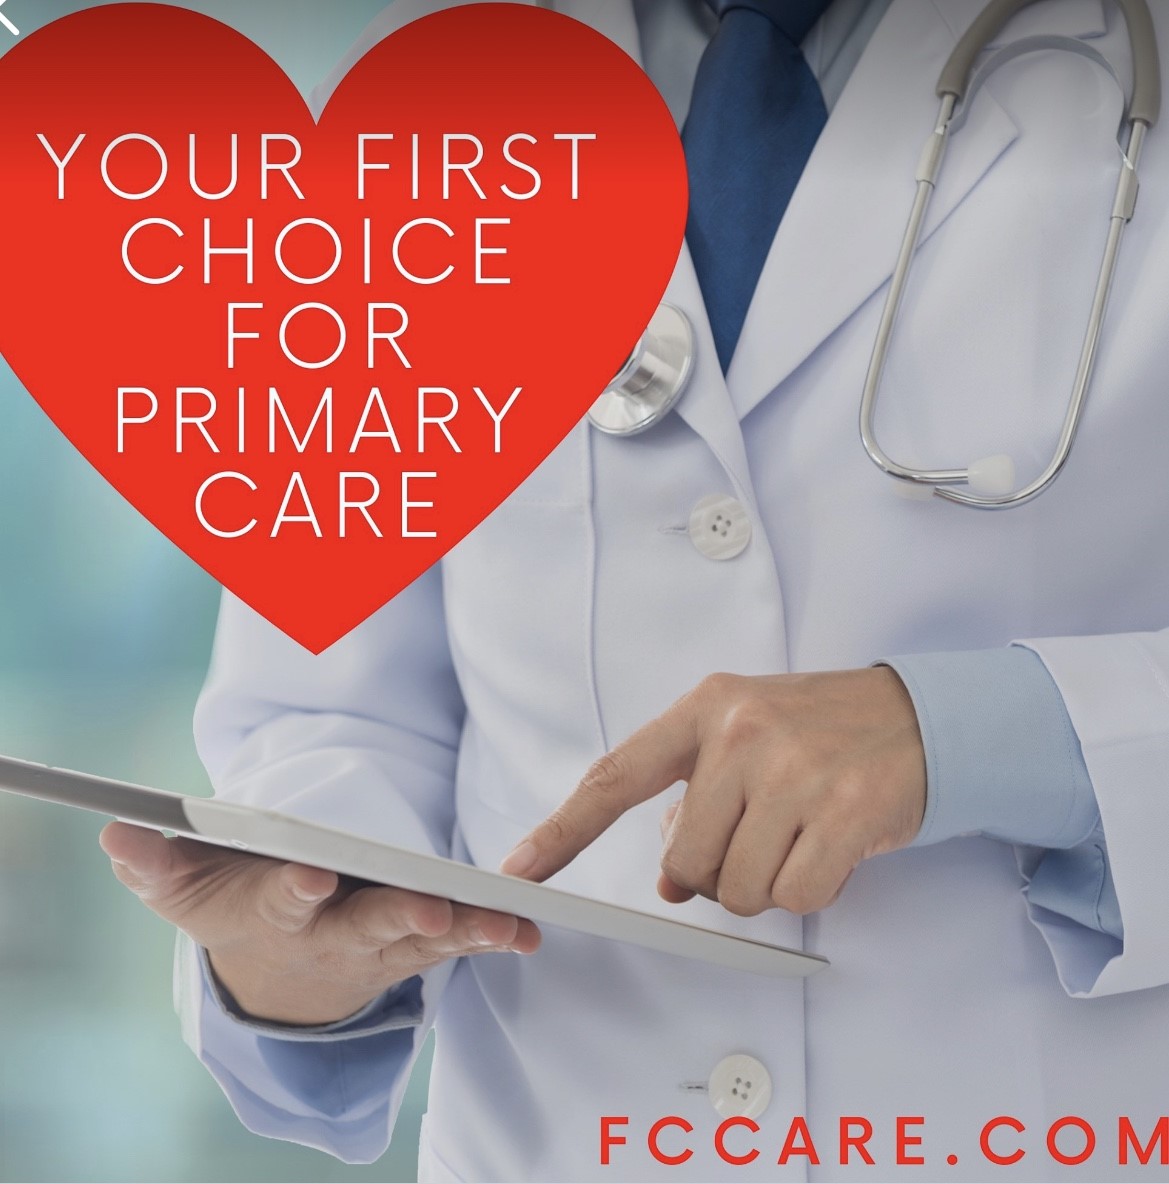 Your First Choice For Primary Care